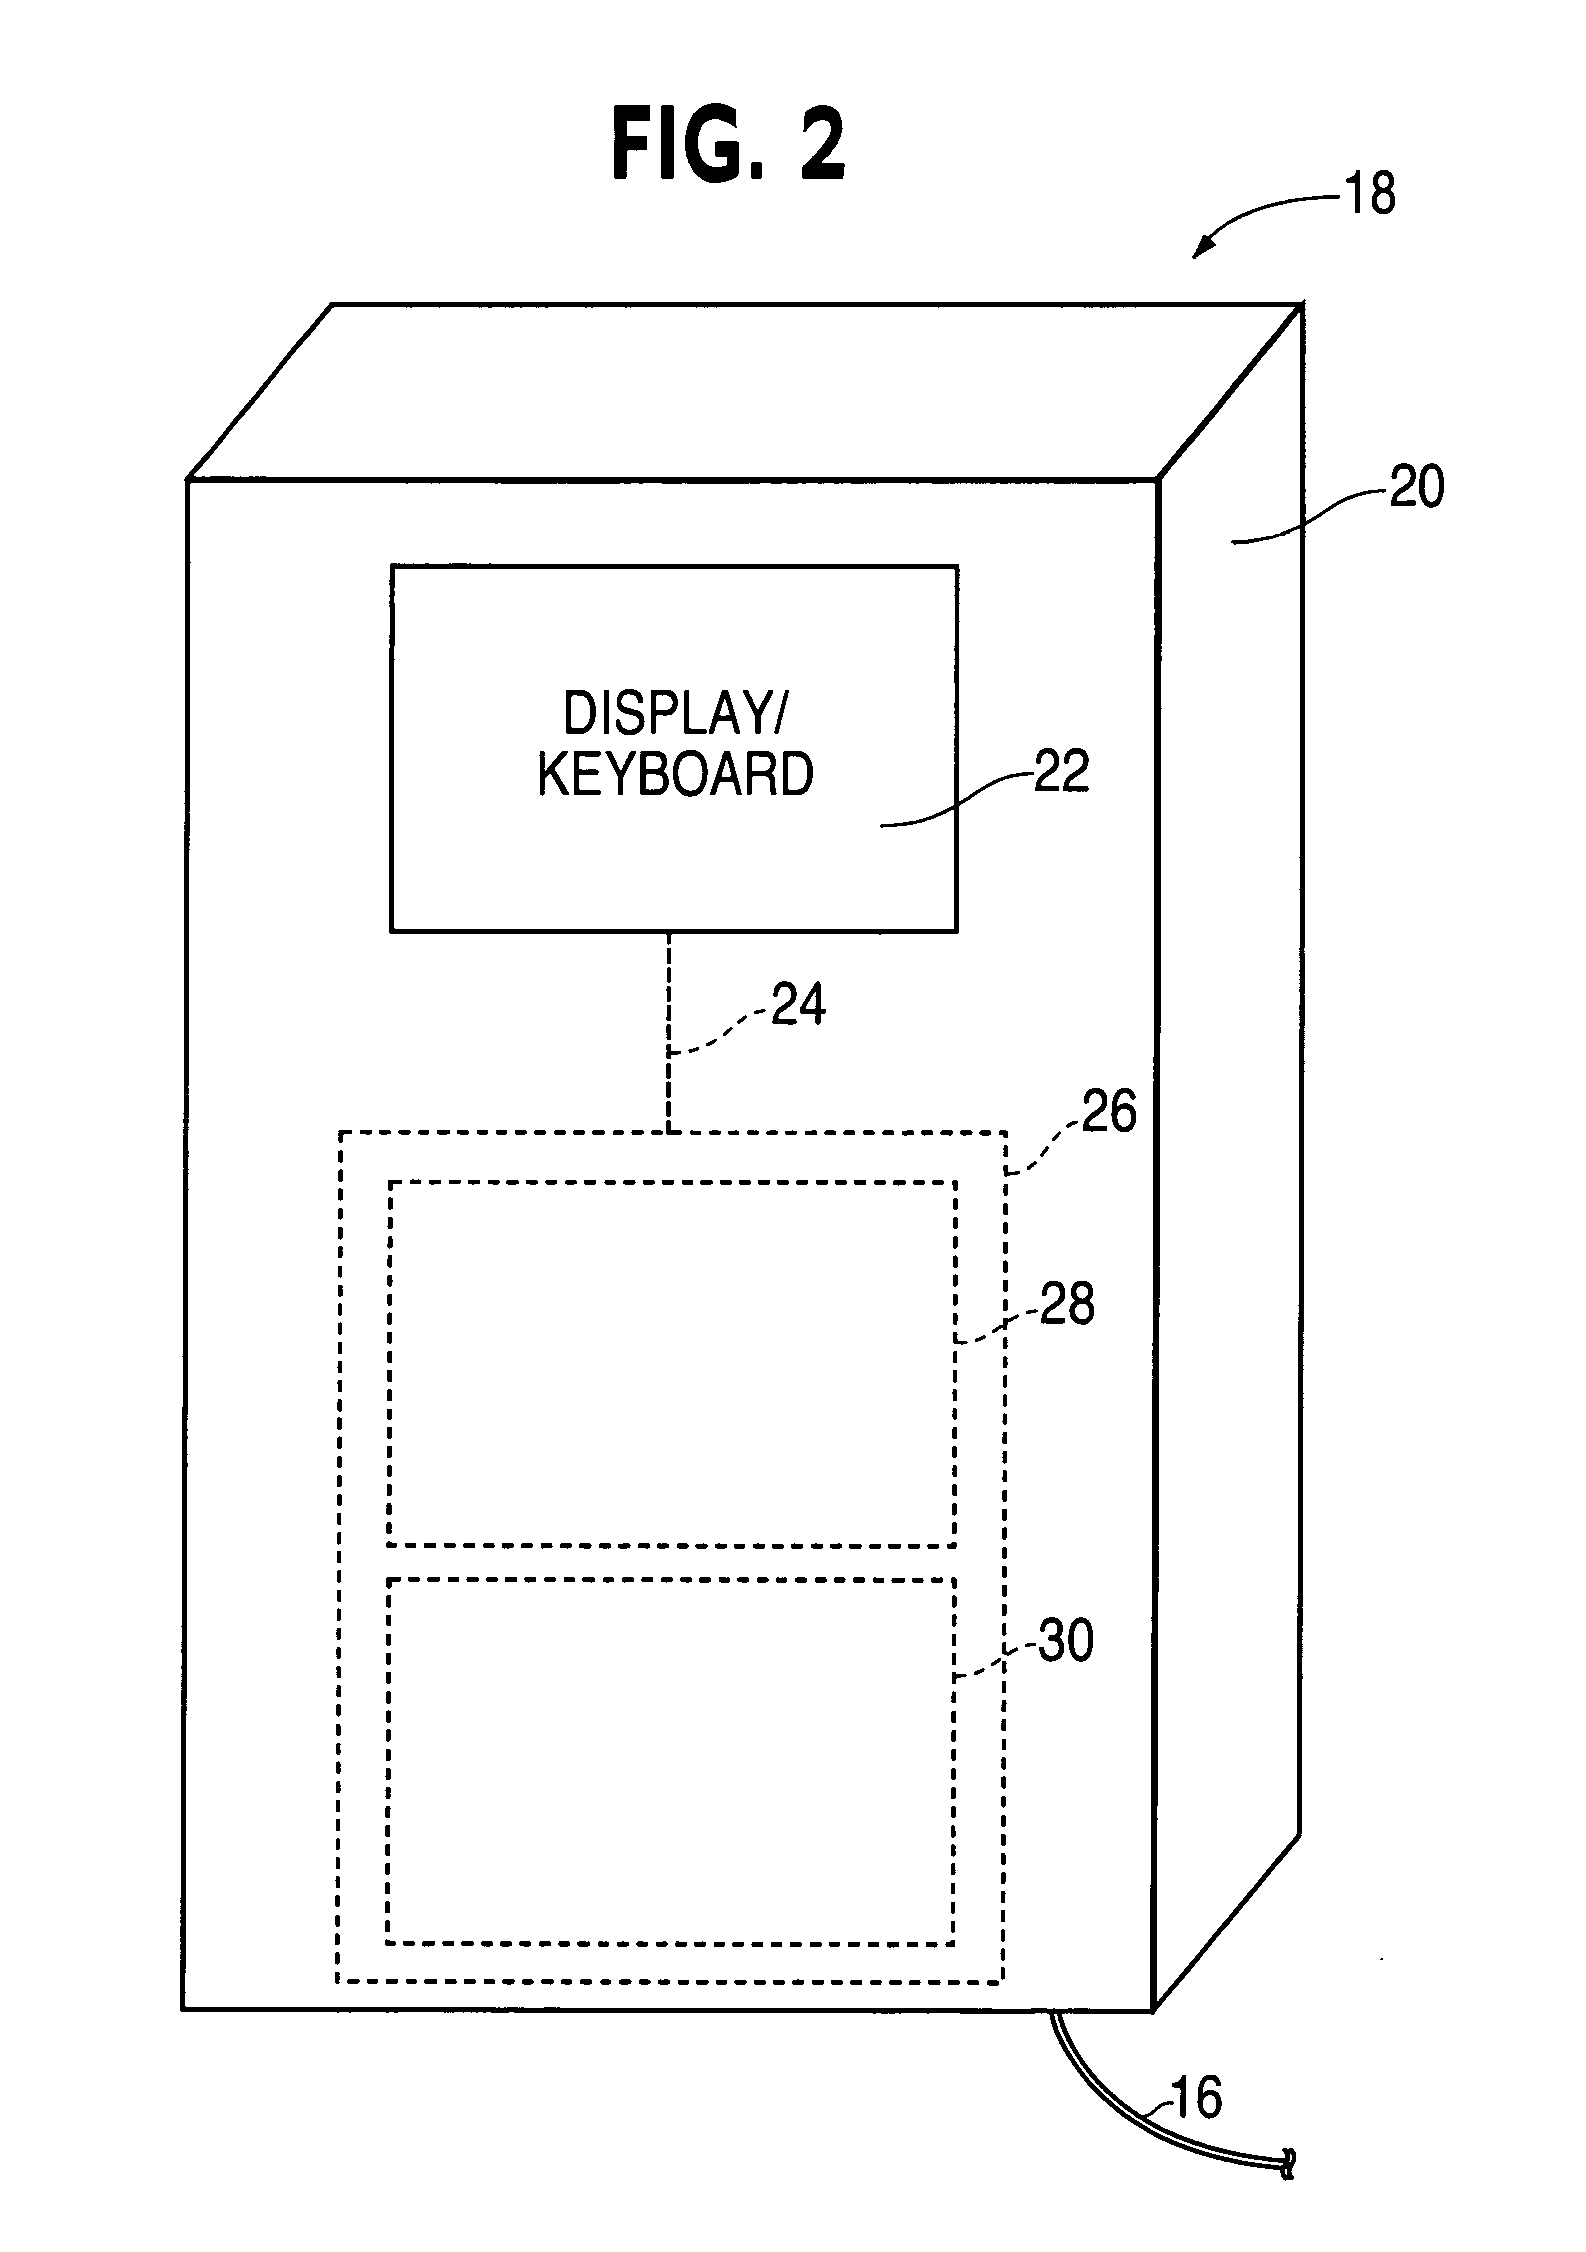 Flexible collision detection serial bus transceiver apparatus and method